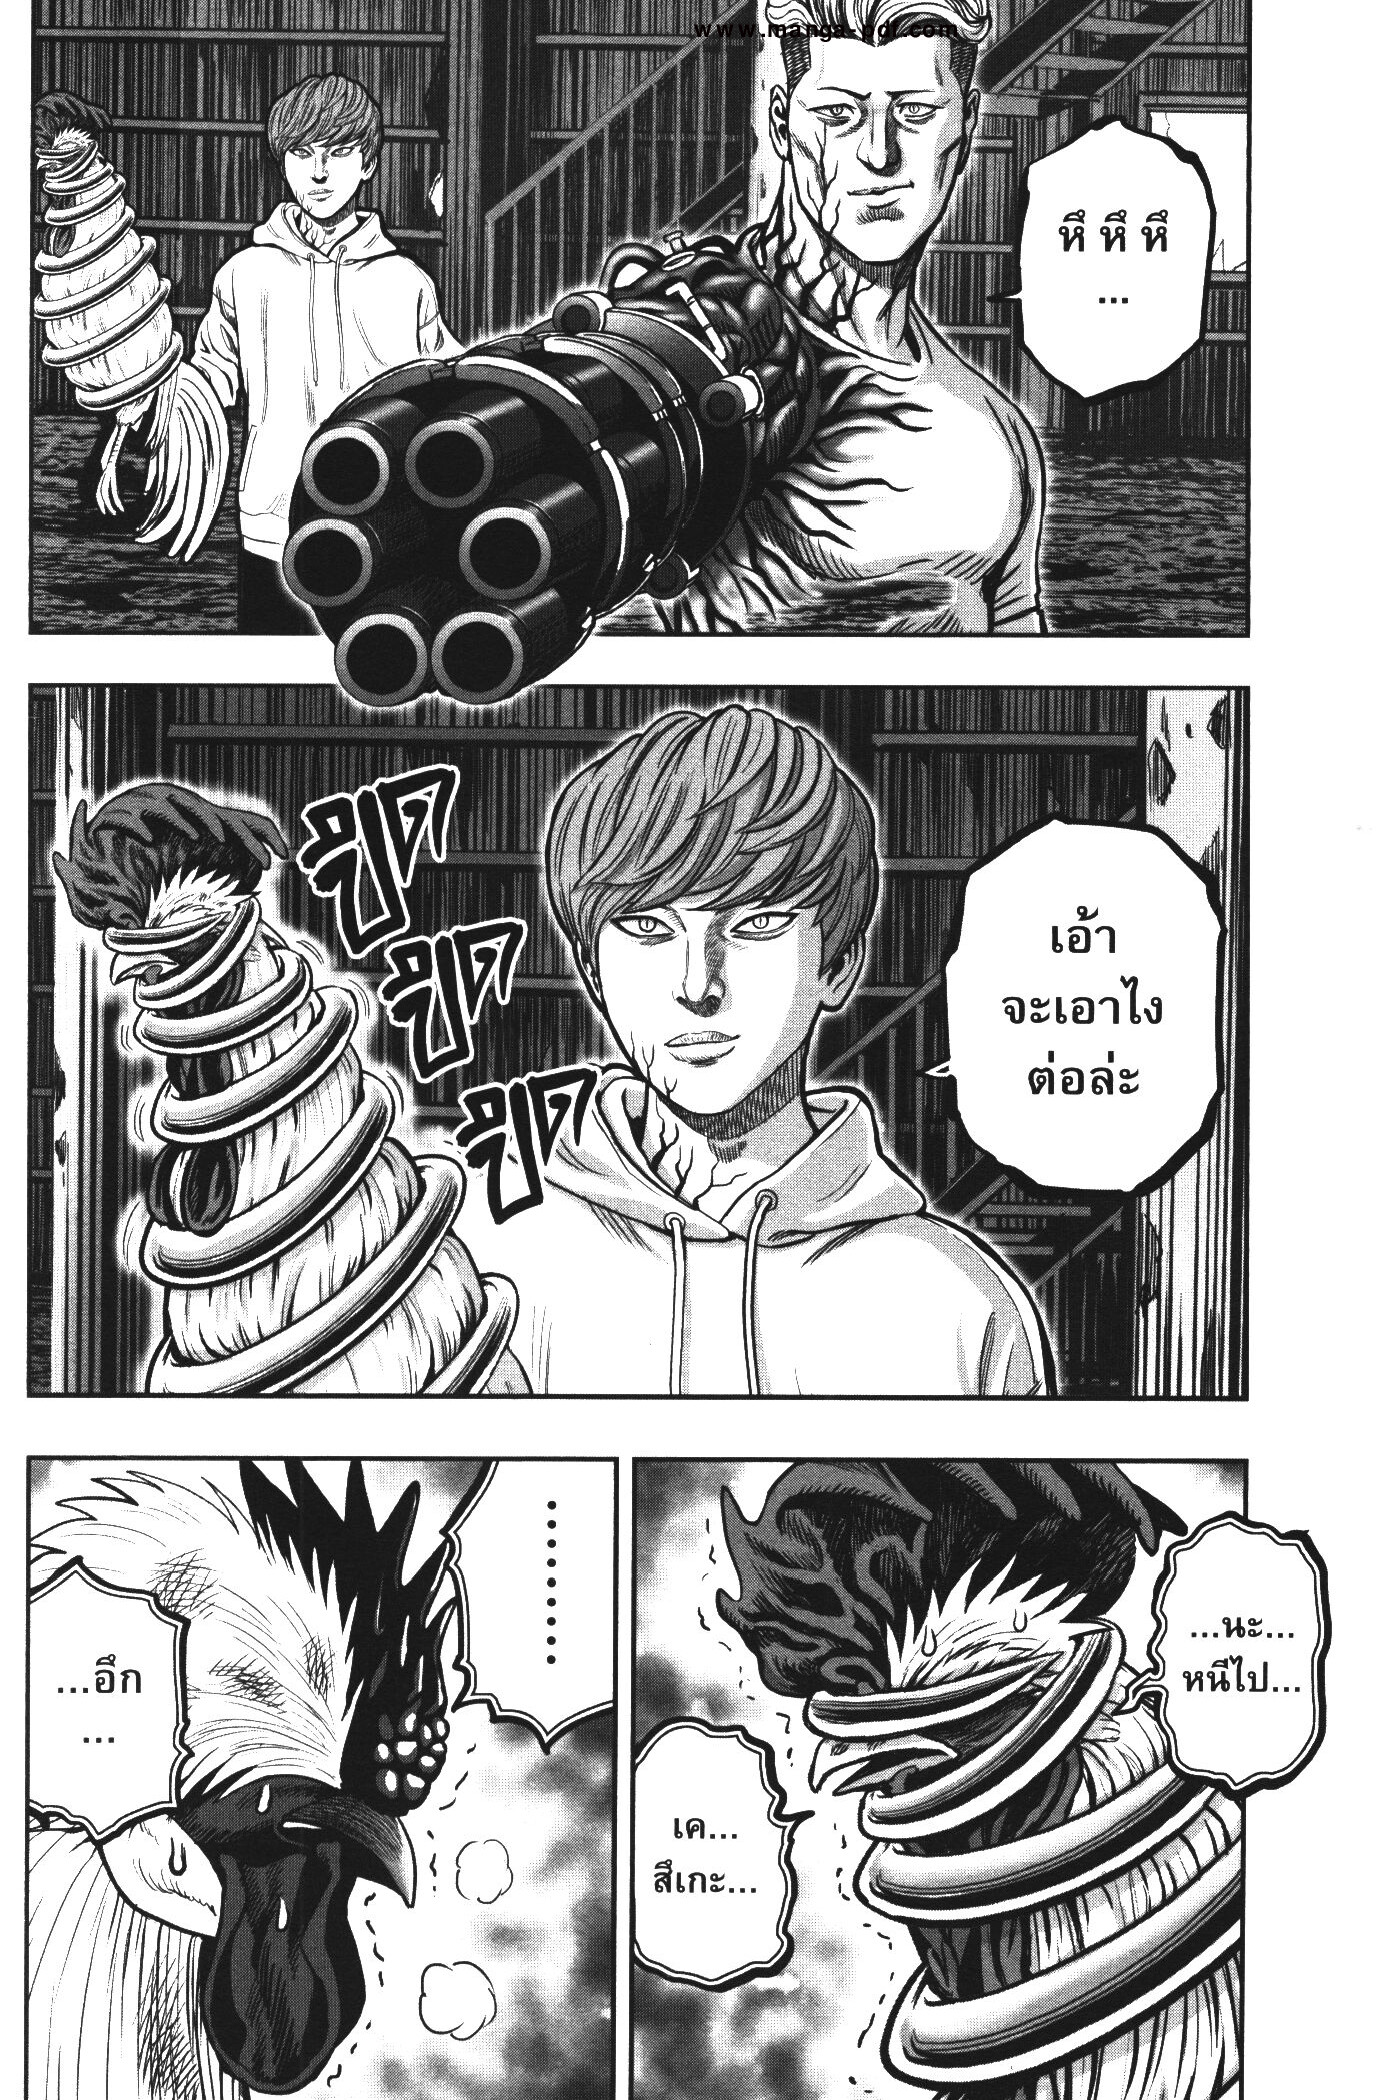 Rooster Fighter 18 (4)